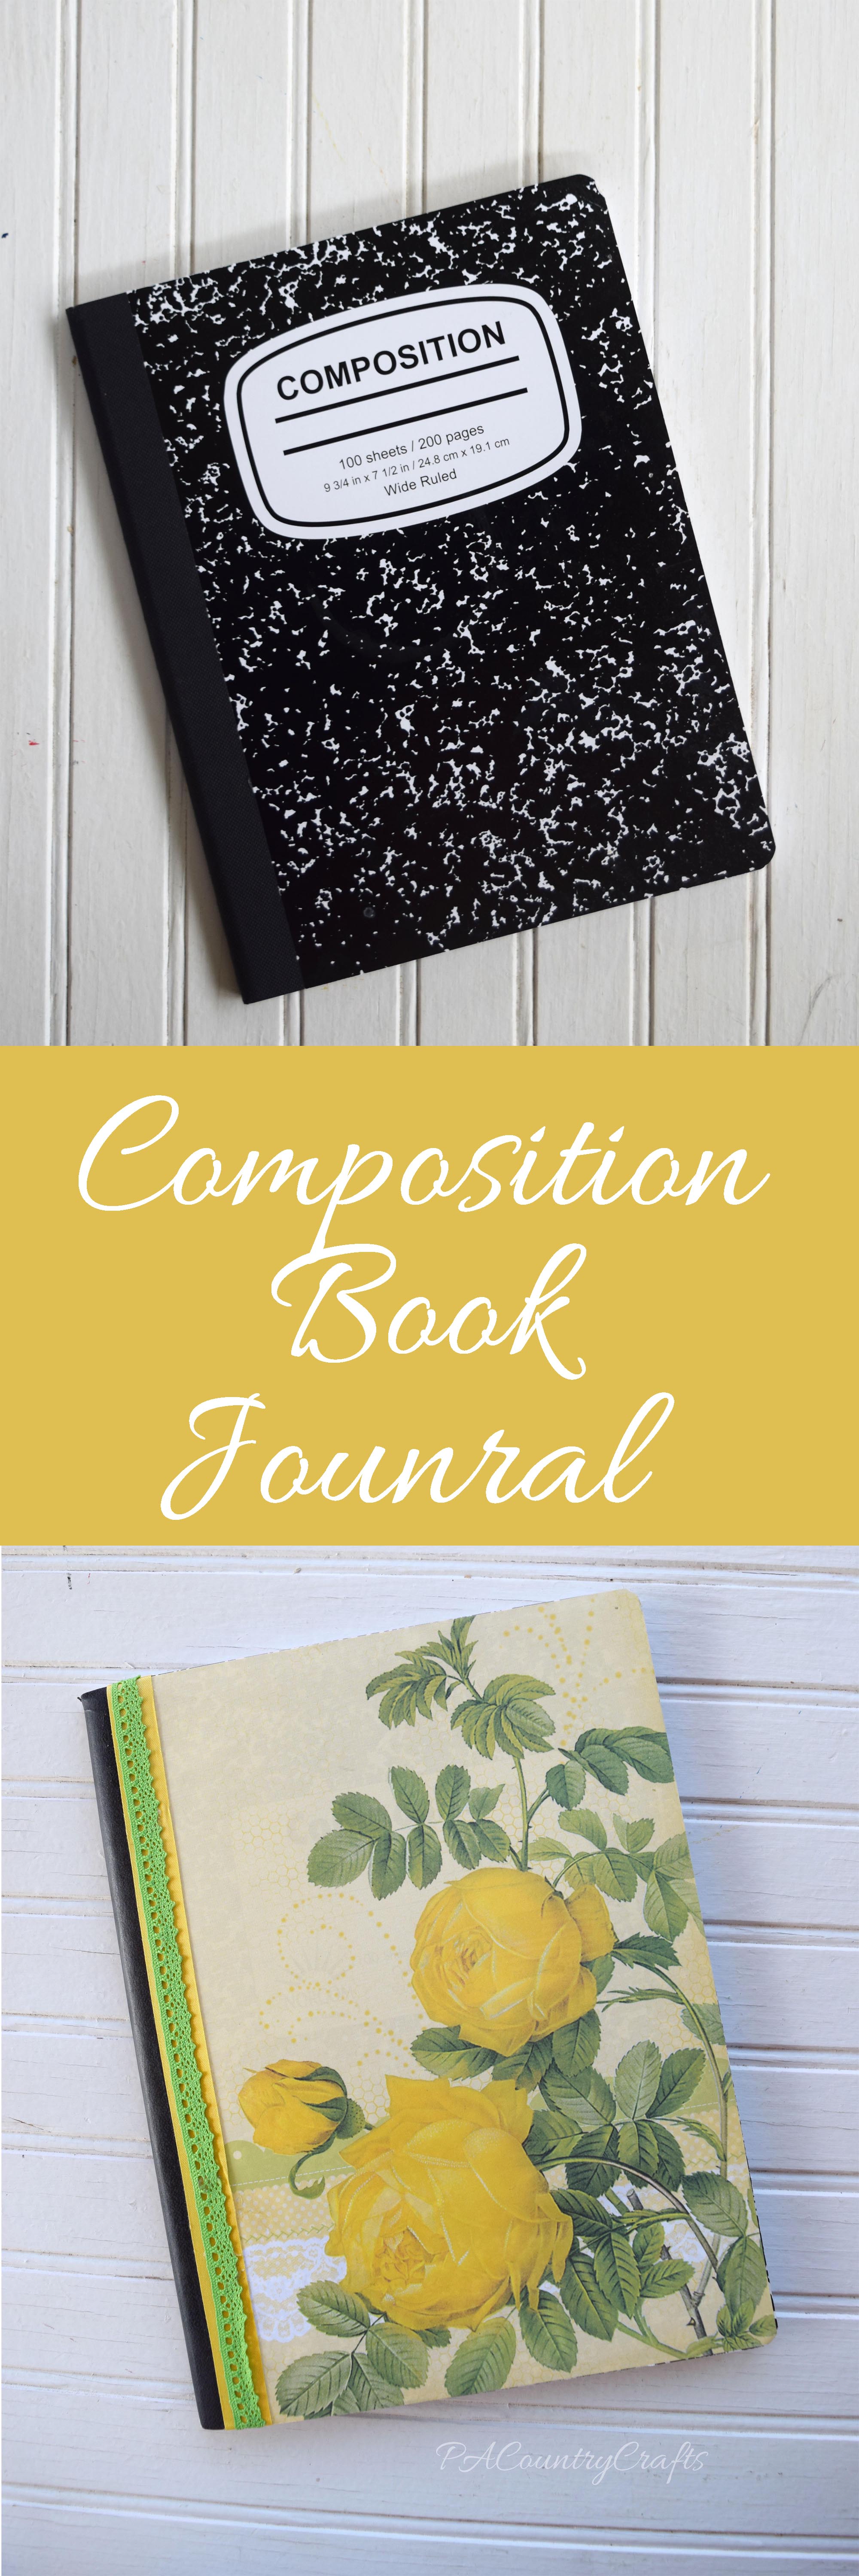 composition-book-journal